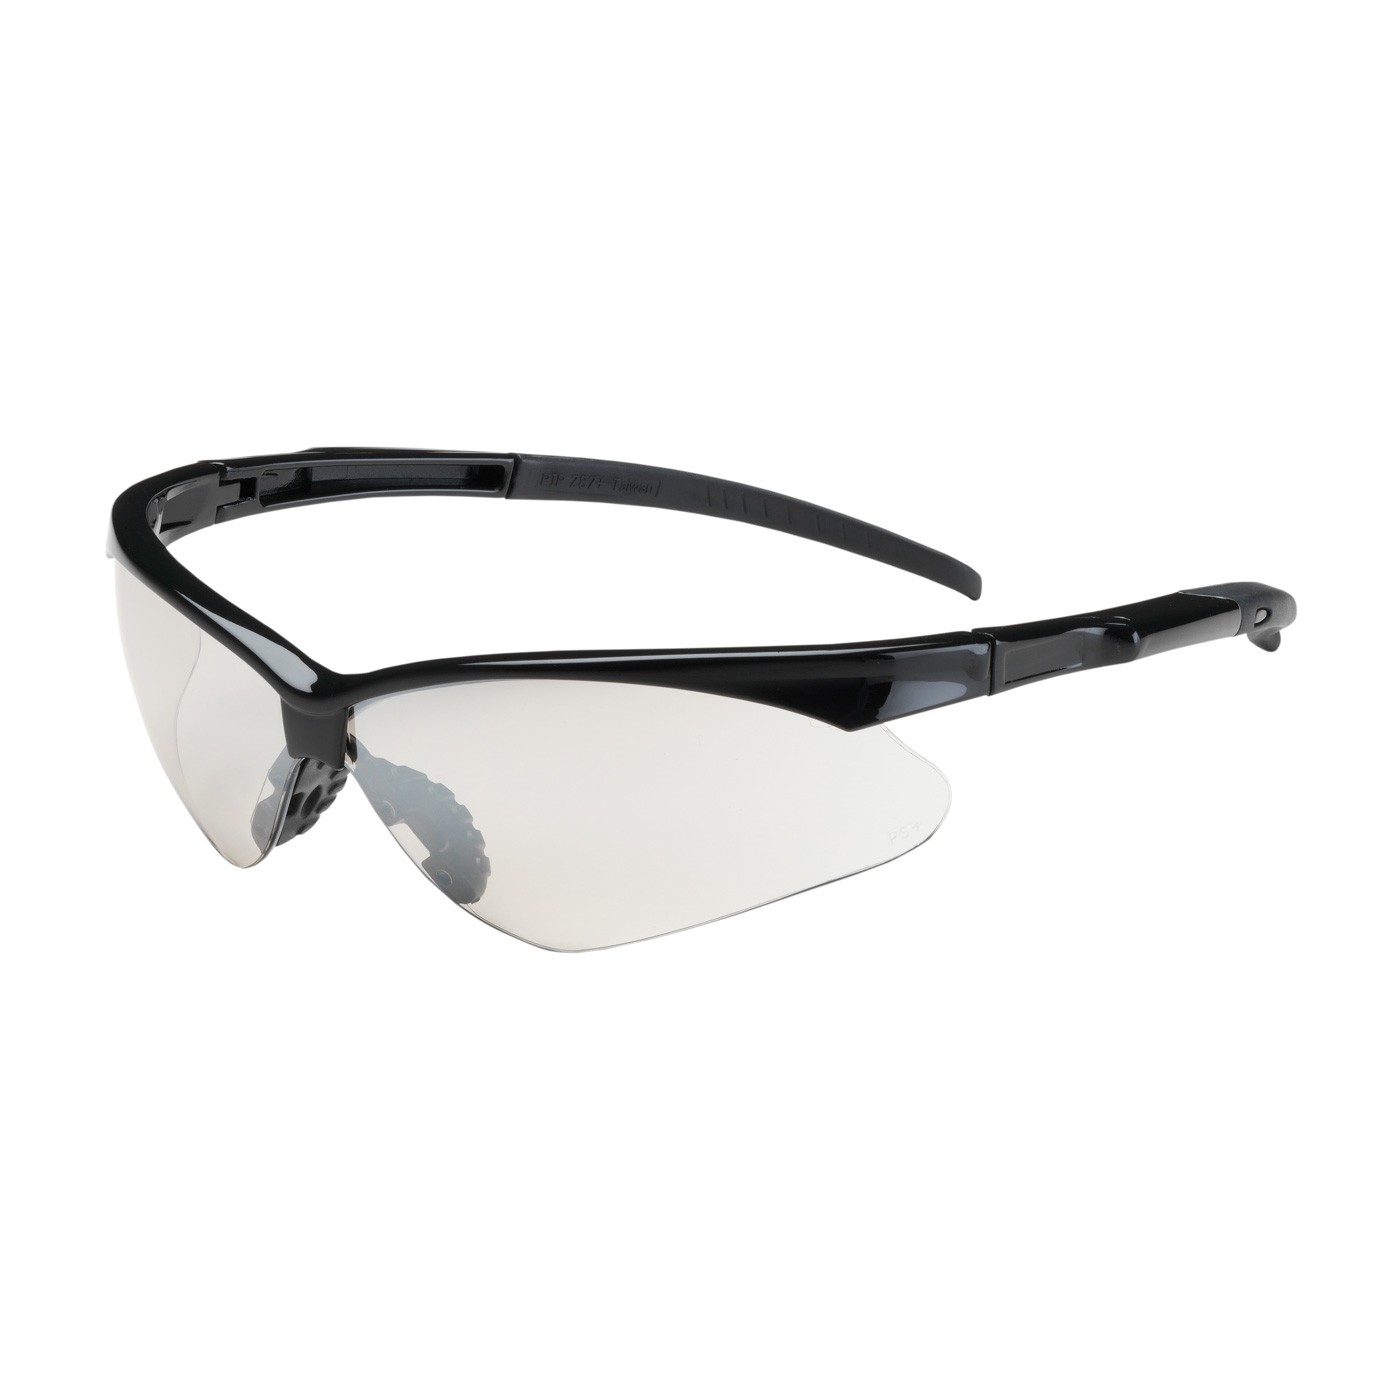 Adversary™ Semi-Rimless Safety Glasses with Black Frame, I/O Lens and Anti-Scratch Coating  (#250-28-0002)